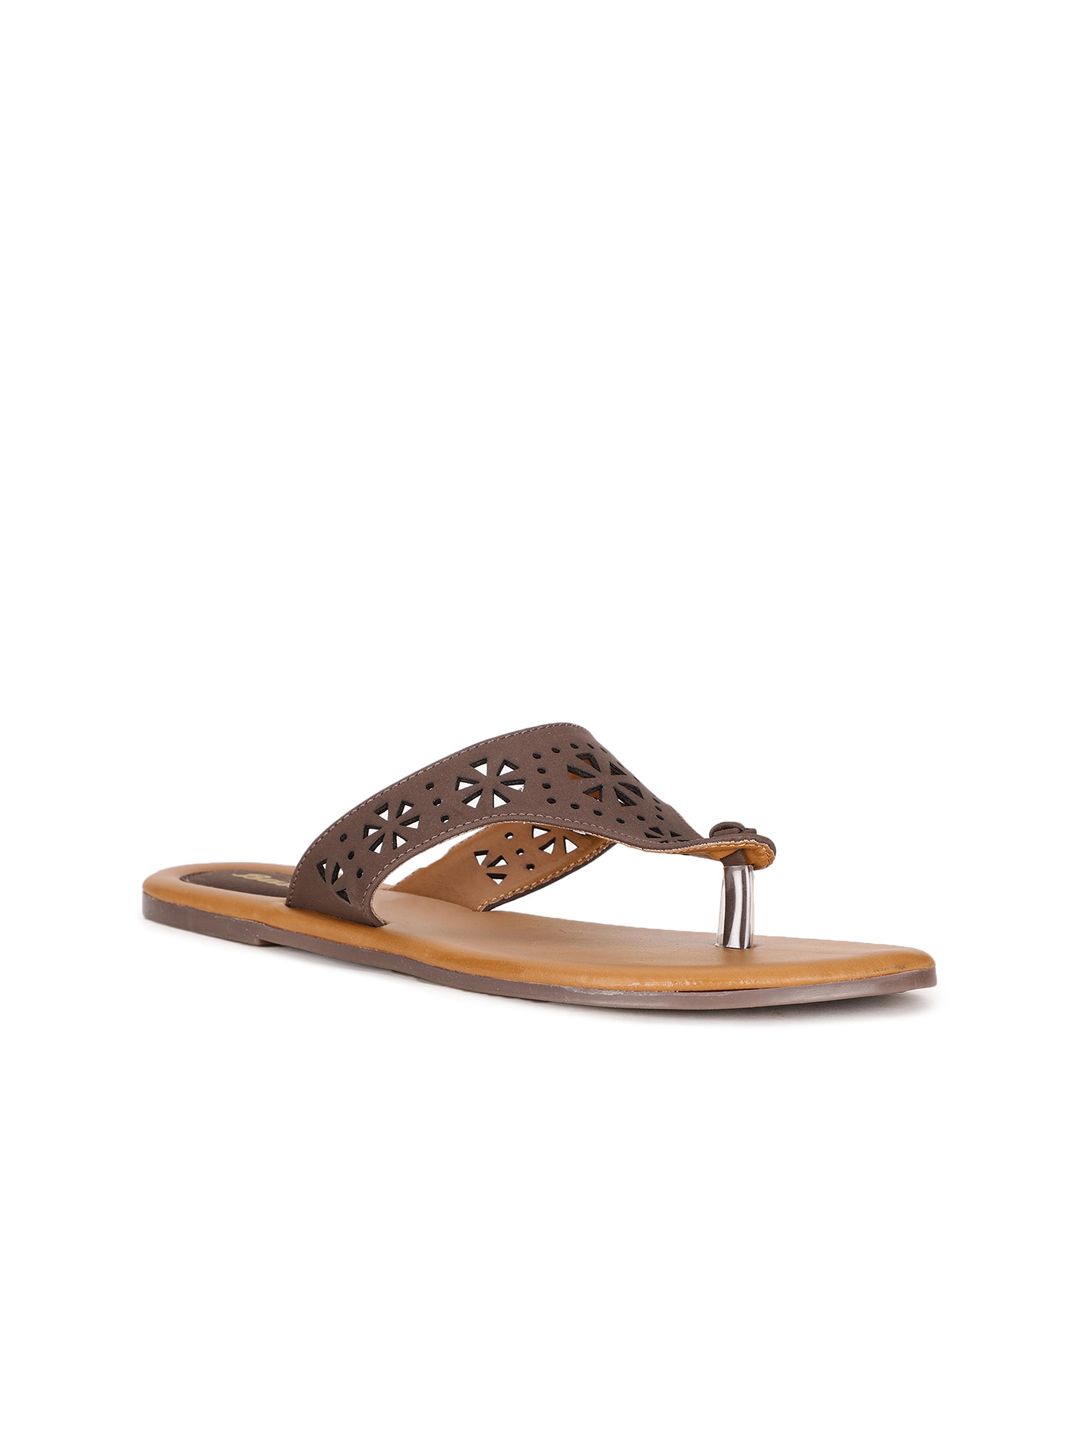 Bata Women Brown Open Toe Flats with Laser Cuts Price in India